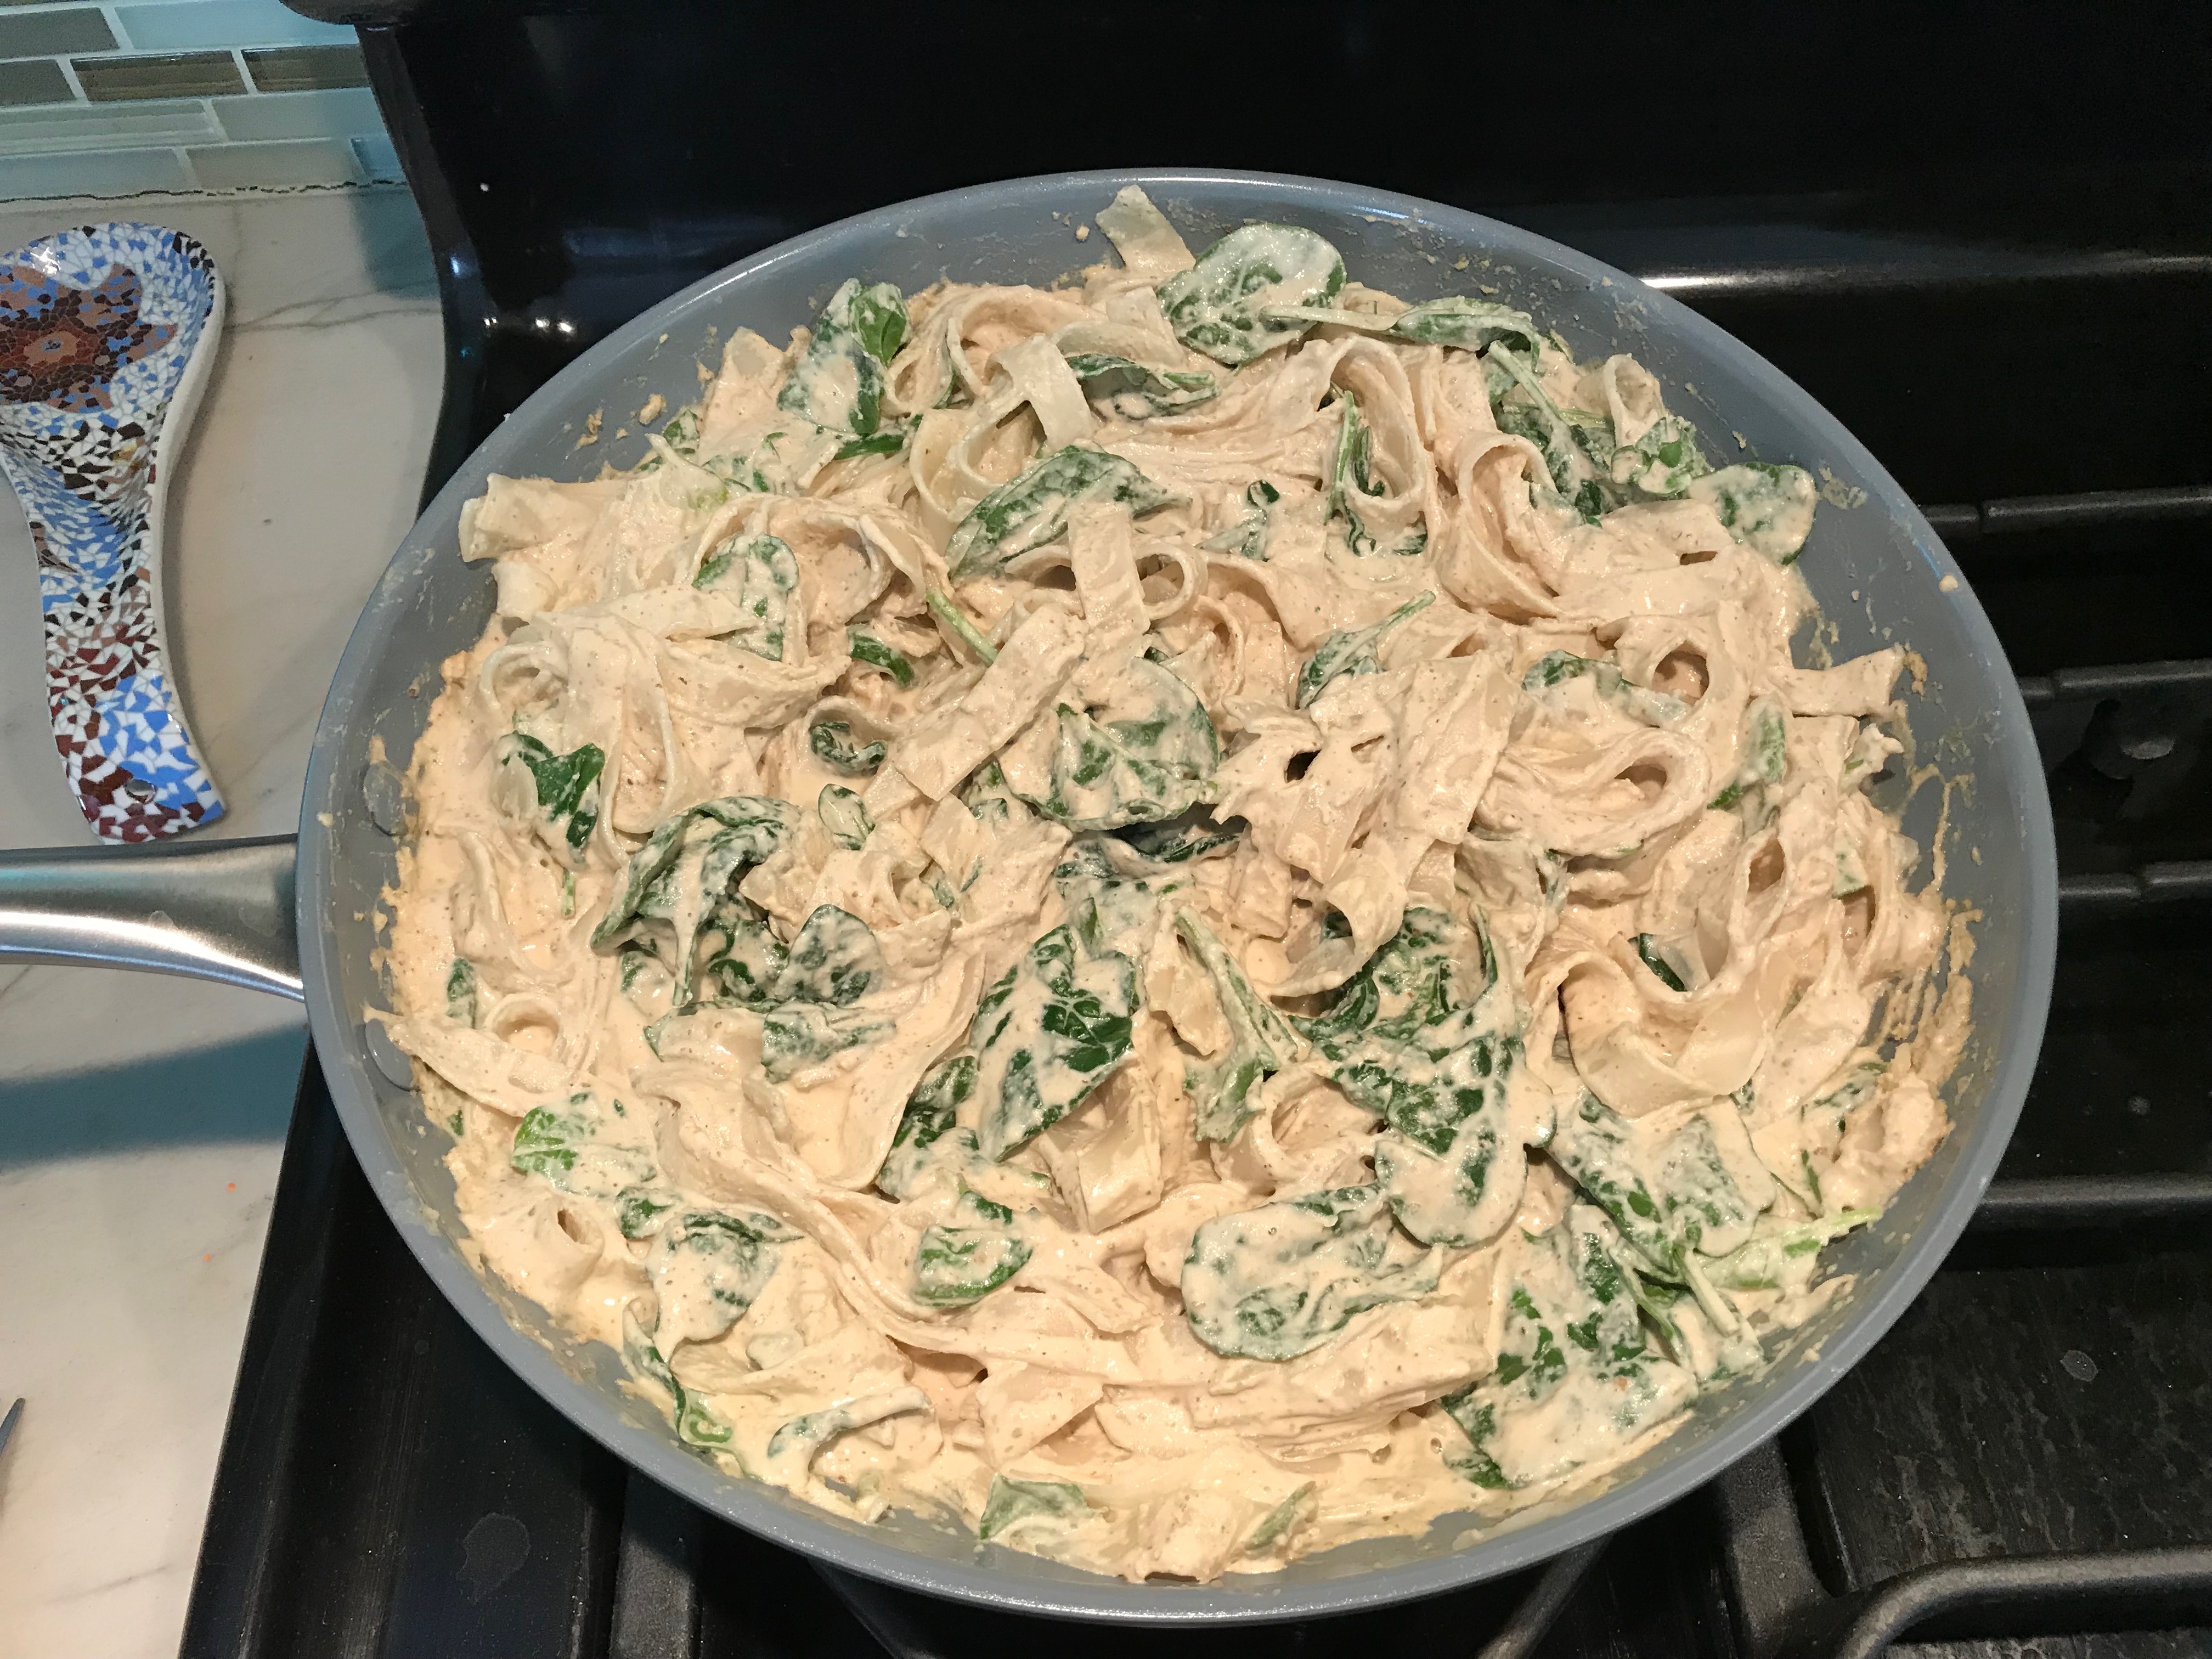 Walnut cream Sauce, Spinach, and Fettuccine all mixed together in a skillet on stove top. This Walnut Sauce recipe with Ricotta and Spinach is thick, rich, nutty, and creamy.  It's inspired by the traditional Italian Walnut Sauce from the North-Western Italy, Liguria Region, but my Walnut Sauce recipe adds even more decadence with creamy ricotta and more nutty parmesan cheese.